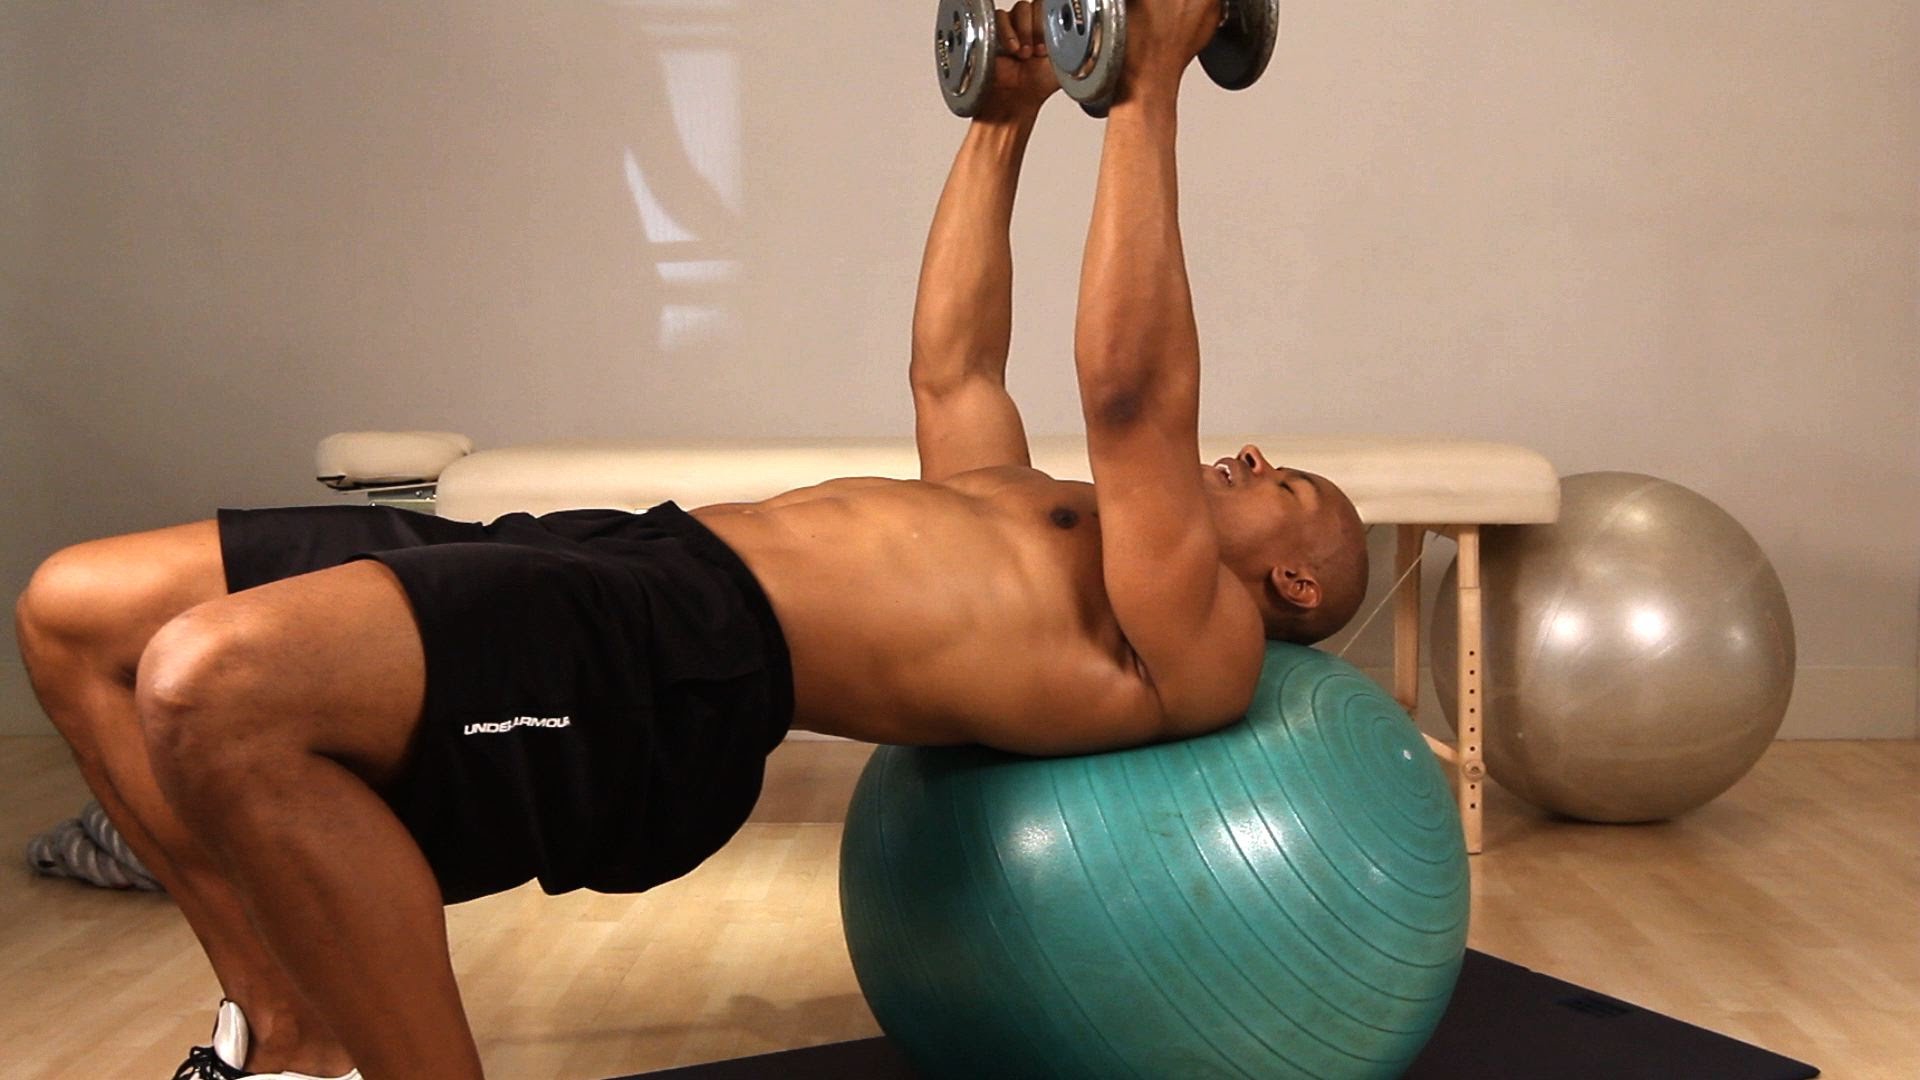 press of dumbbells on fitball